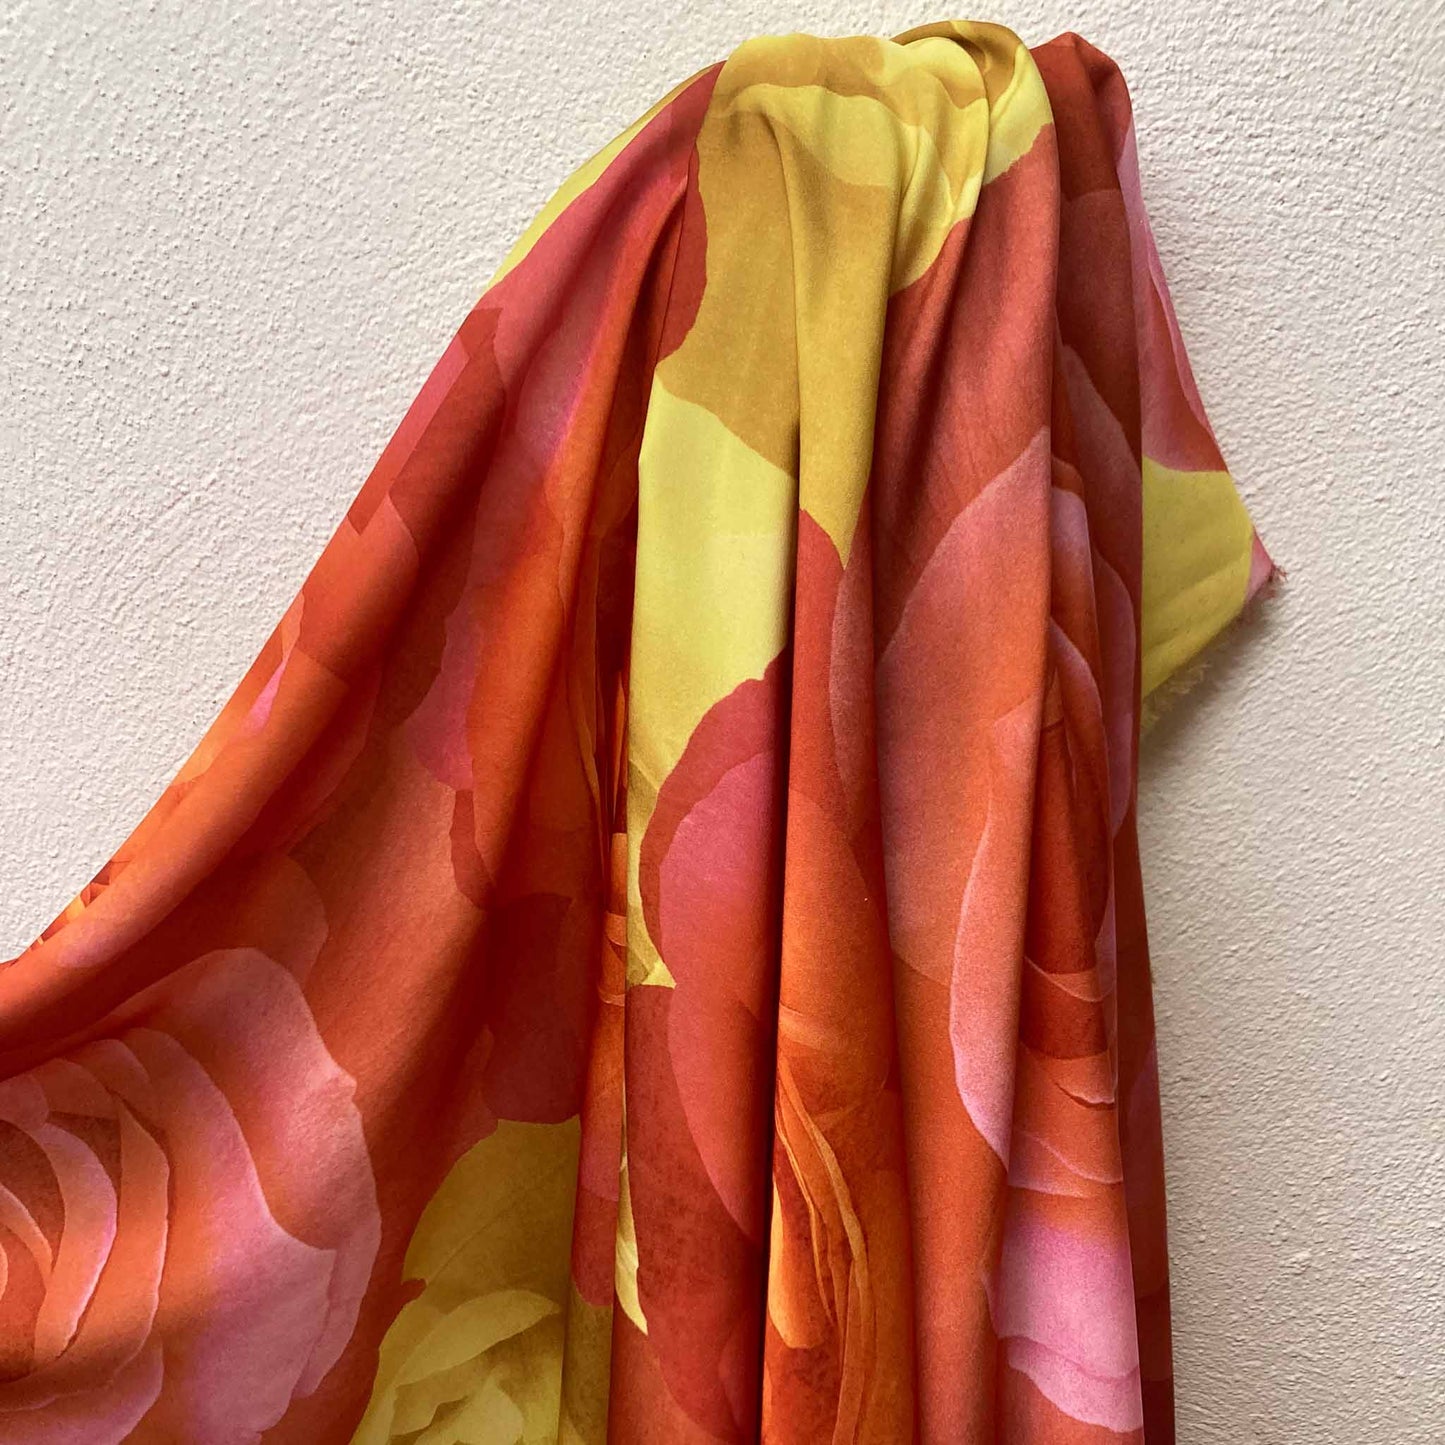 B-stock - Soft Satin Fabric - Red and yellow *